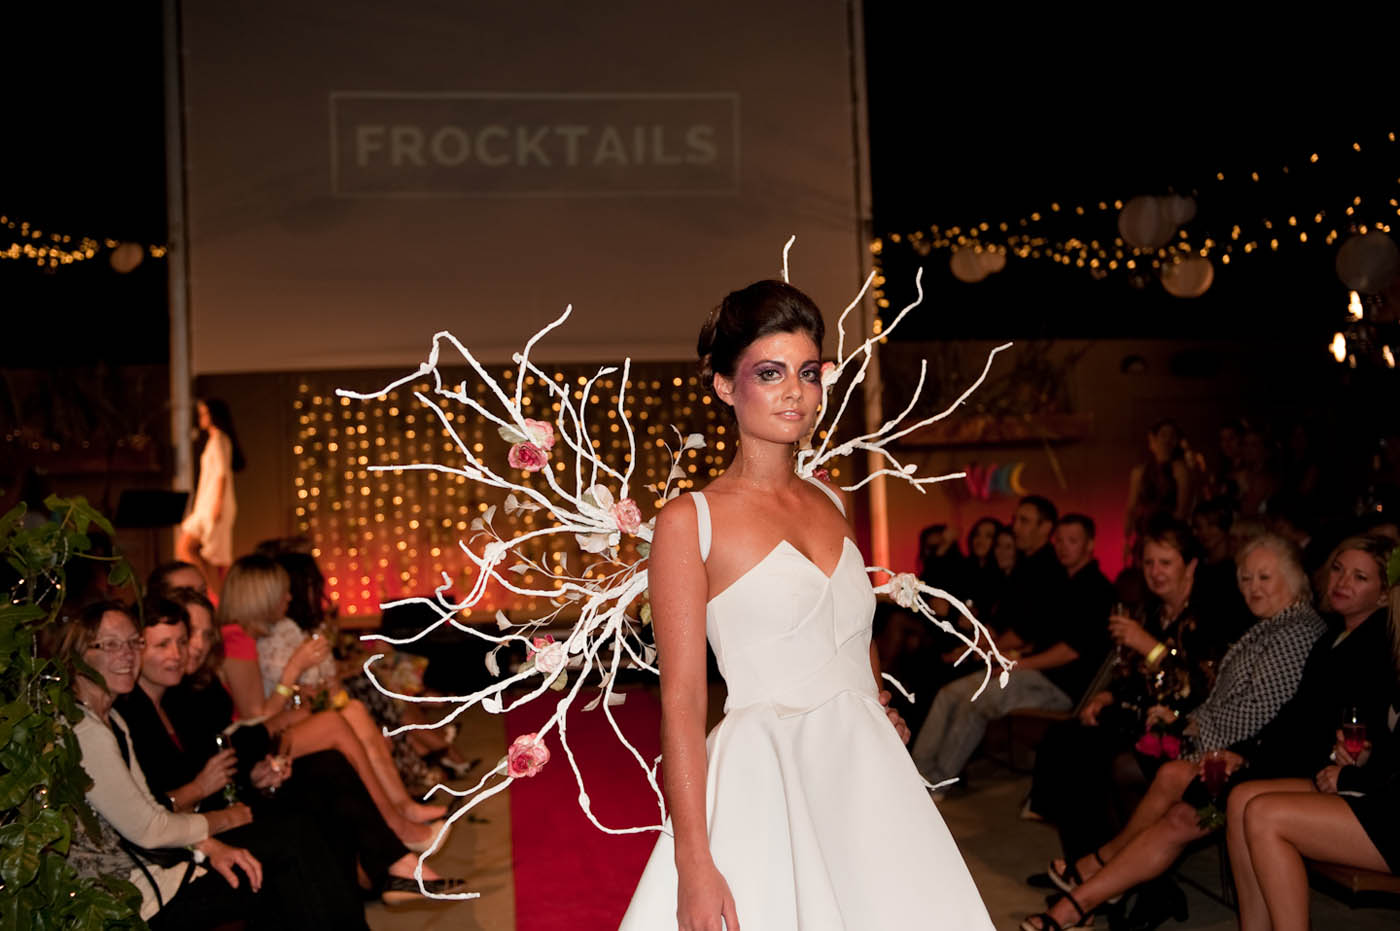 Frocktails photography